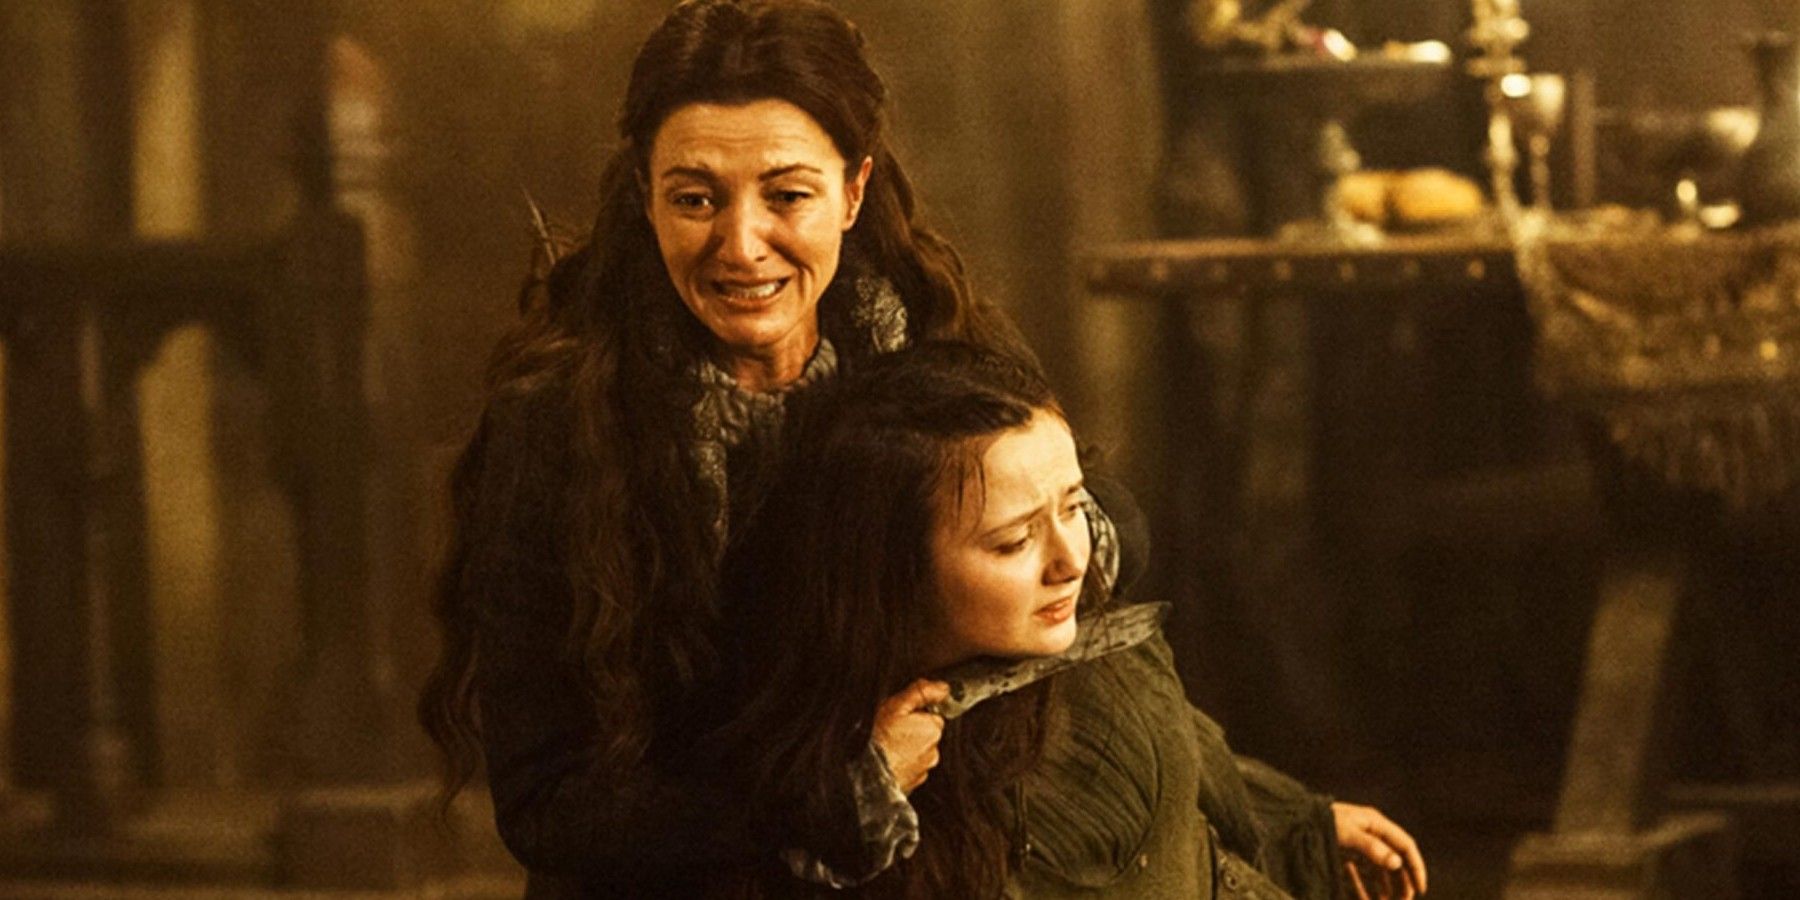 Michelle Fairley plays Catelyn Stark, who holds Frey's wife and screams at the Red Wedding in Game of Thrones.